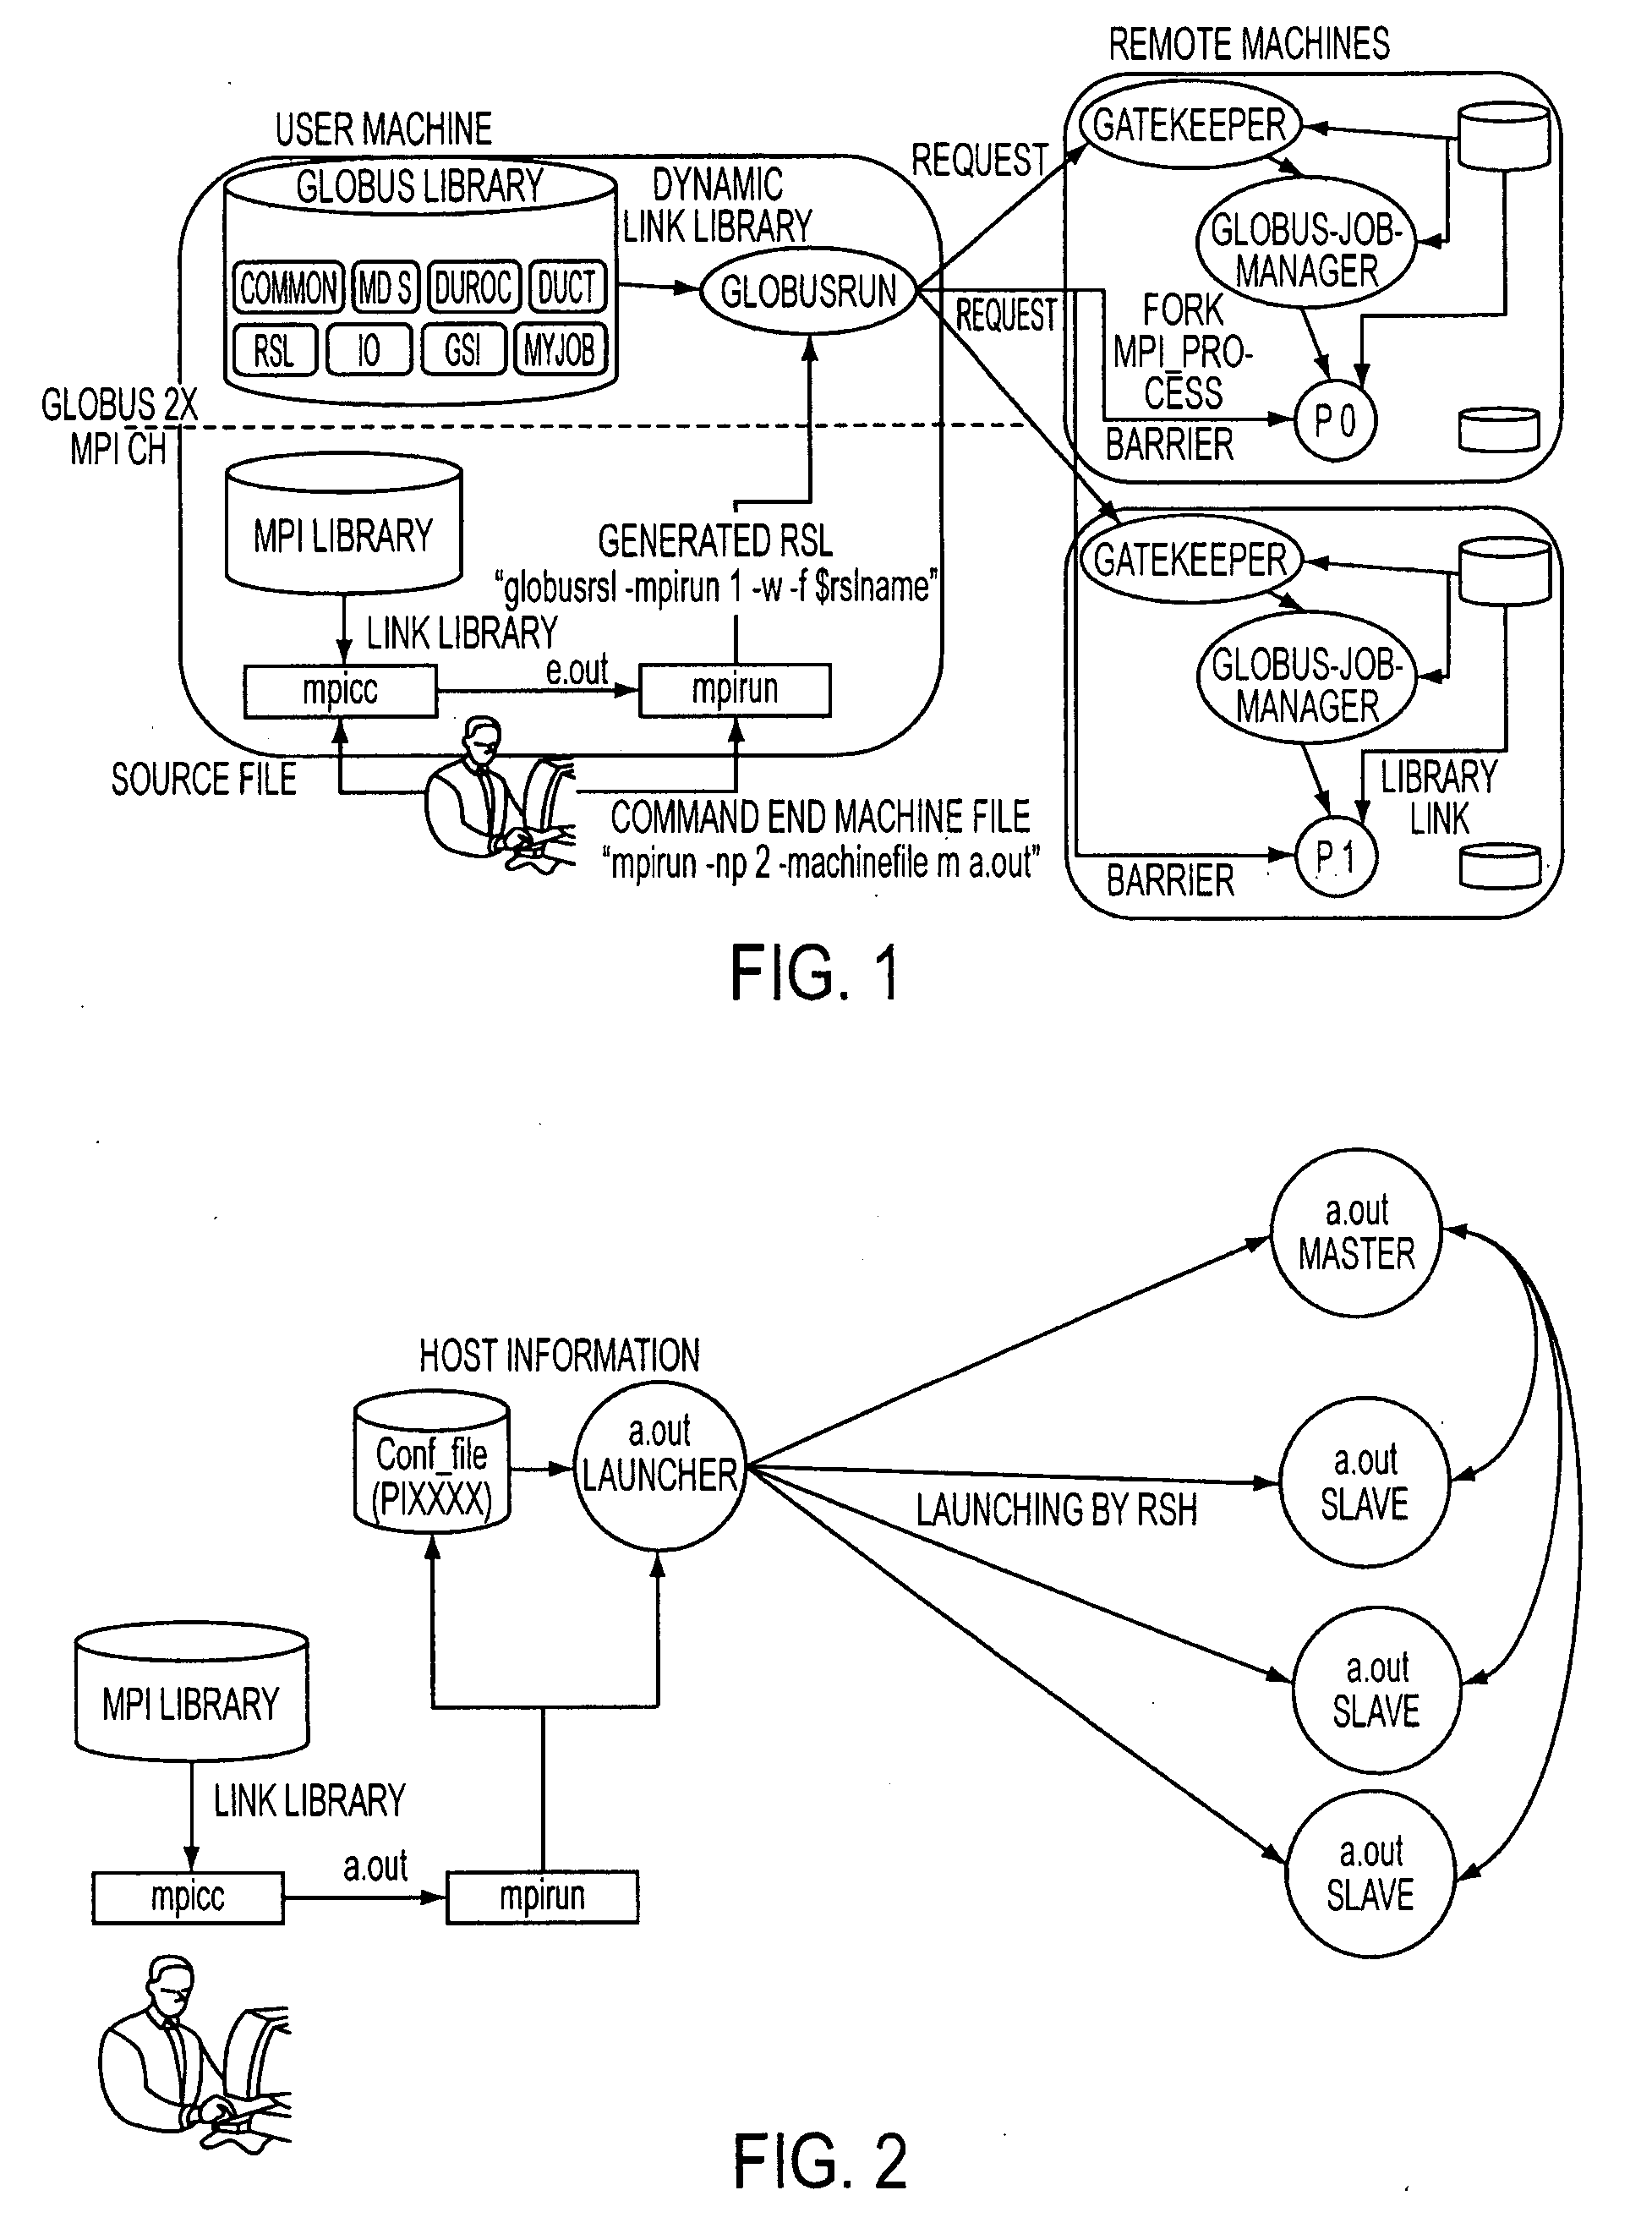 System and method for grid MPI job allocation using file-based MPI initialization in grid computing system